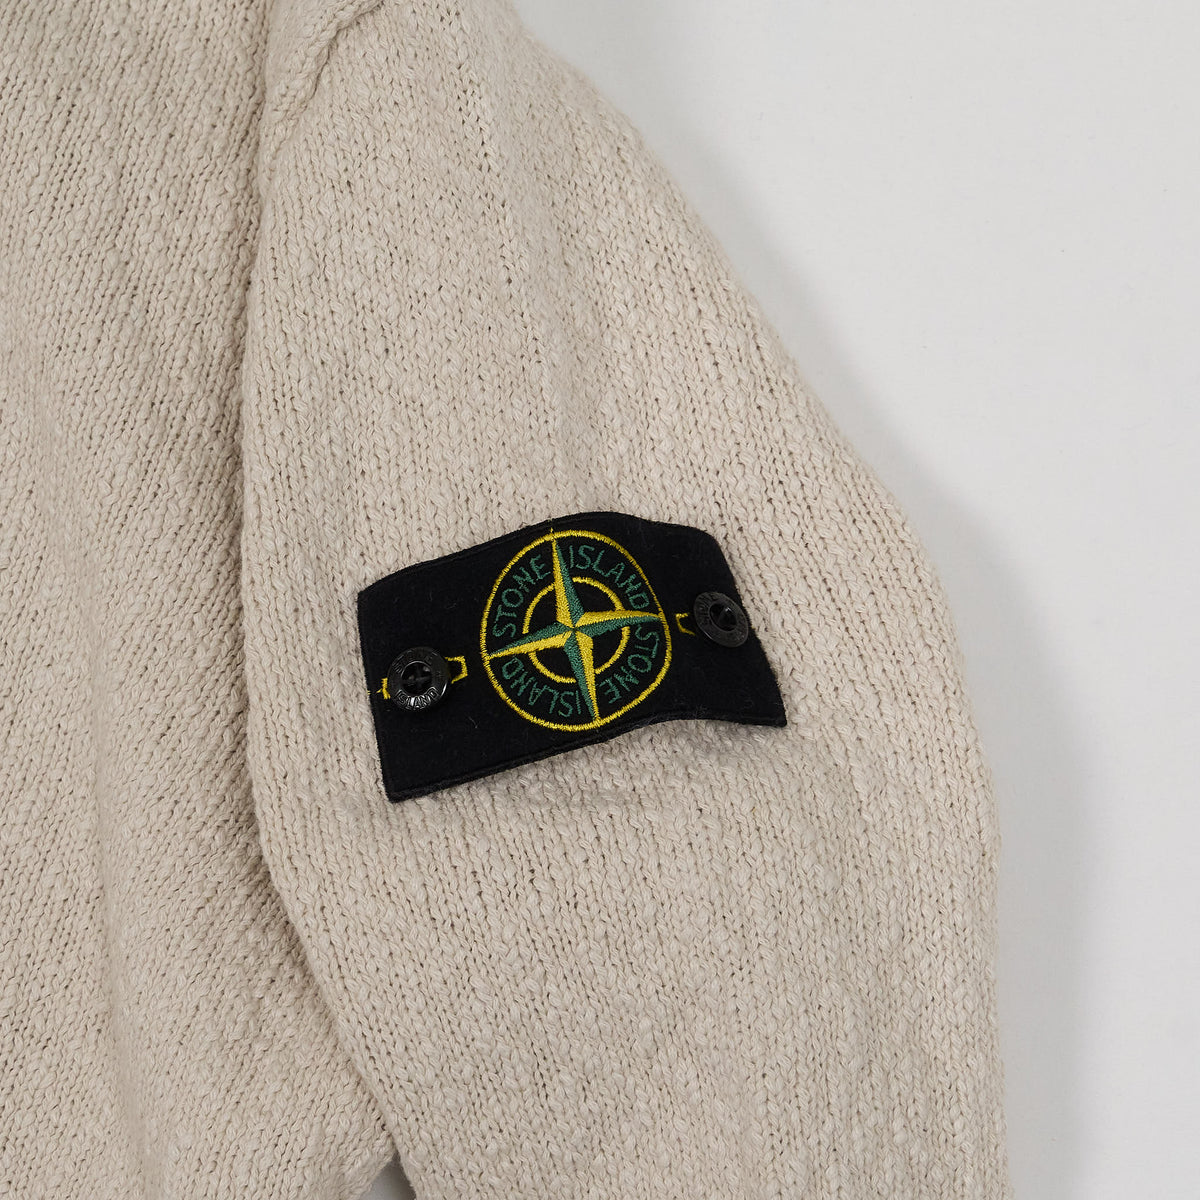 Stone Island Knitted Cotton Linen Pullover